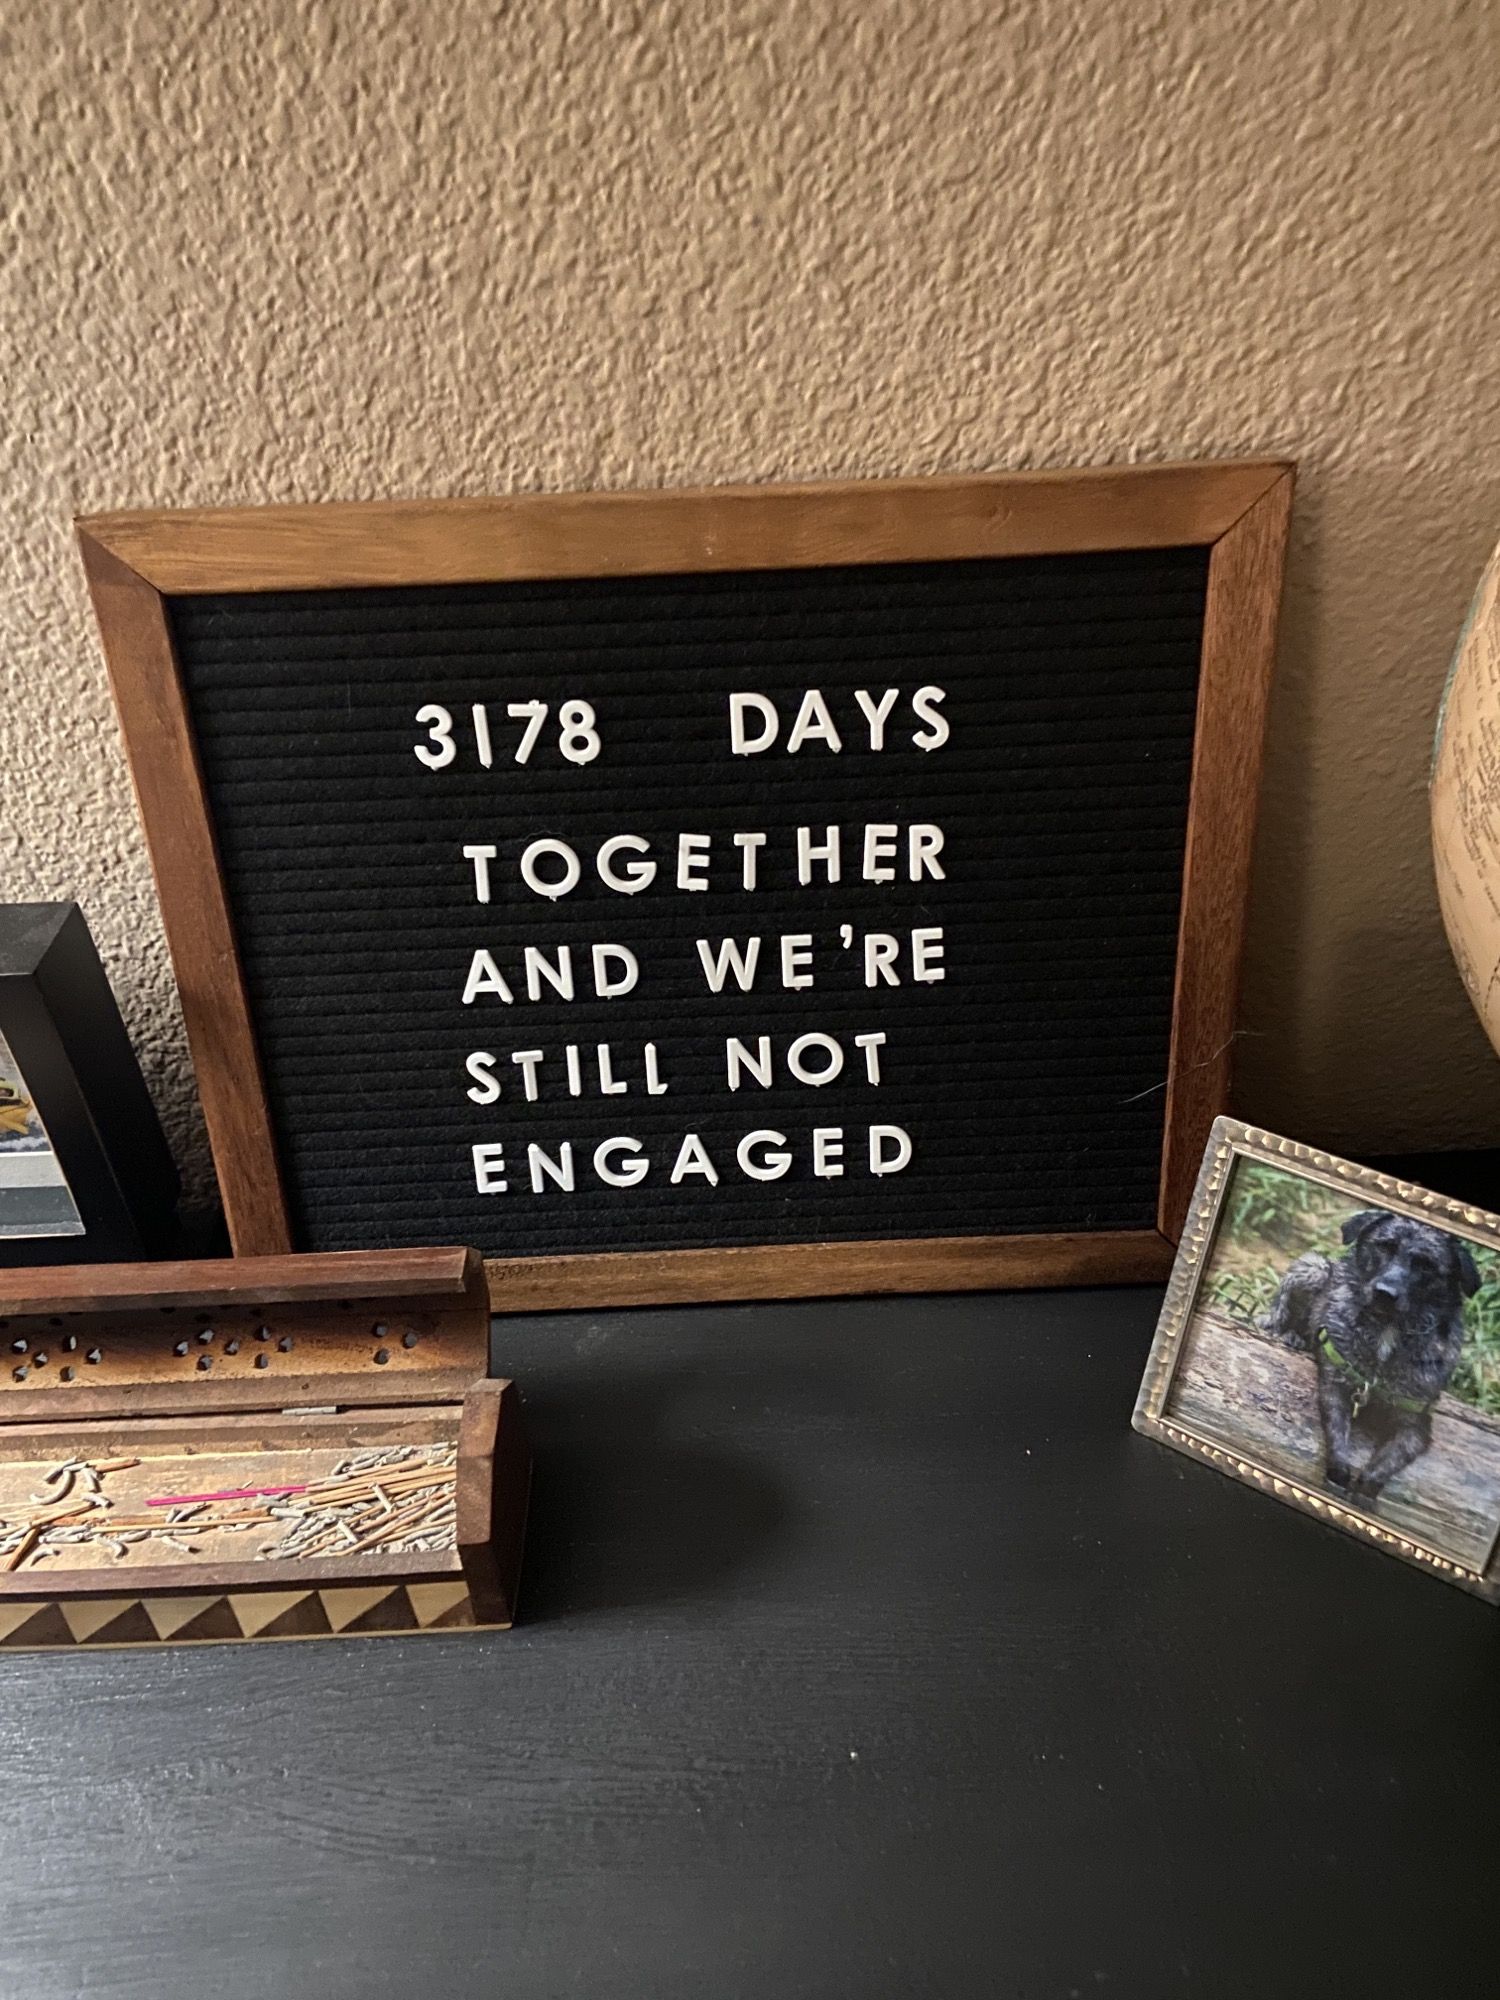 Came from work to see my girlfriend has updated our letter board